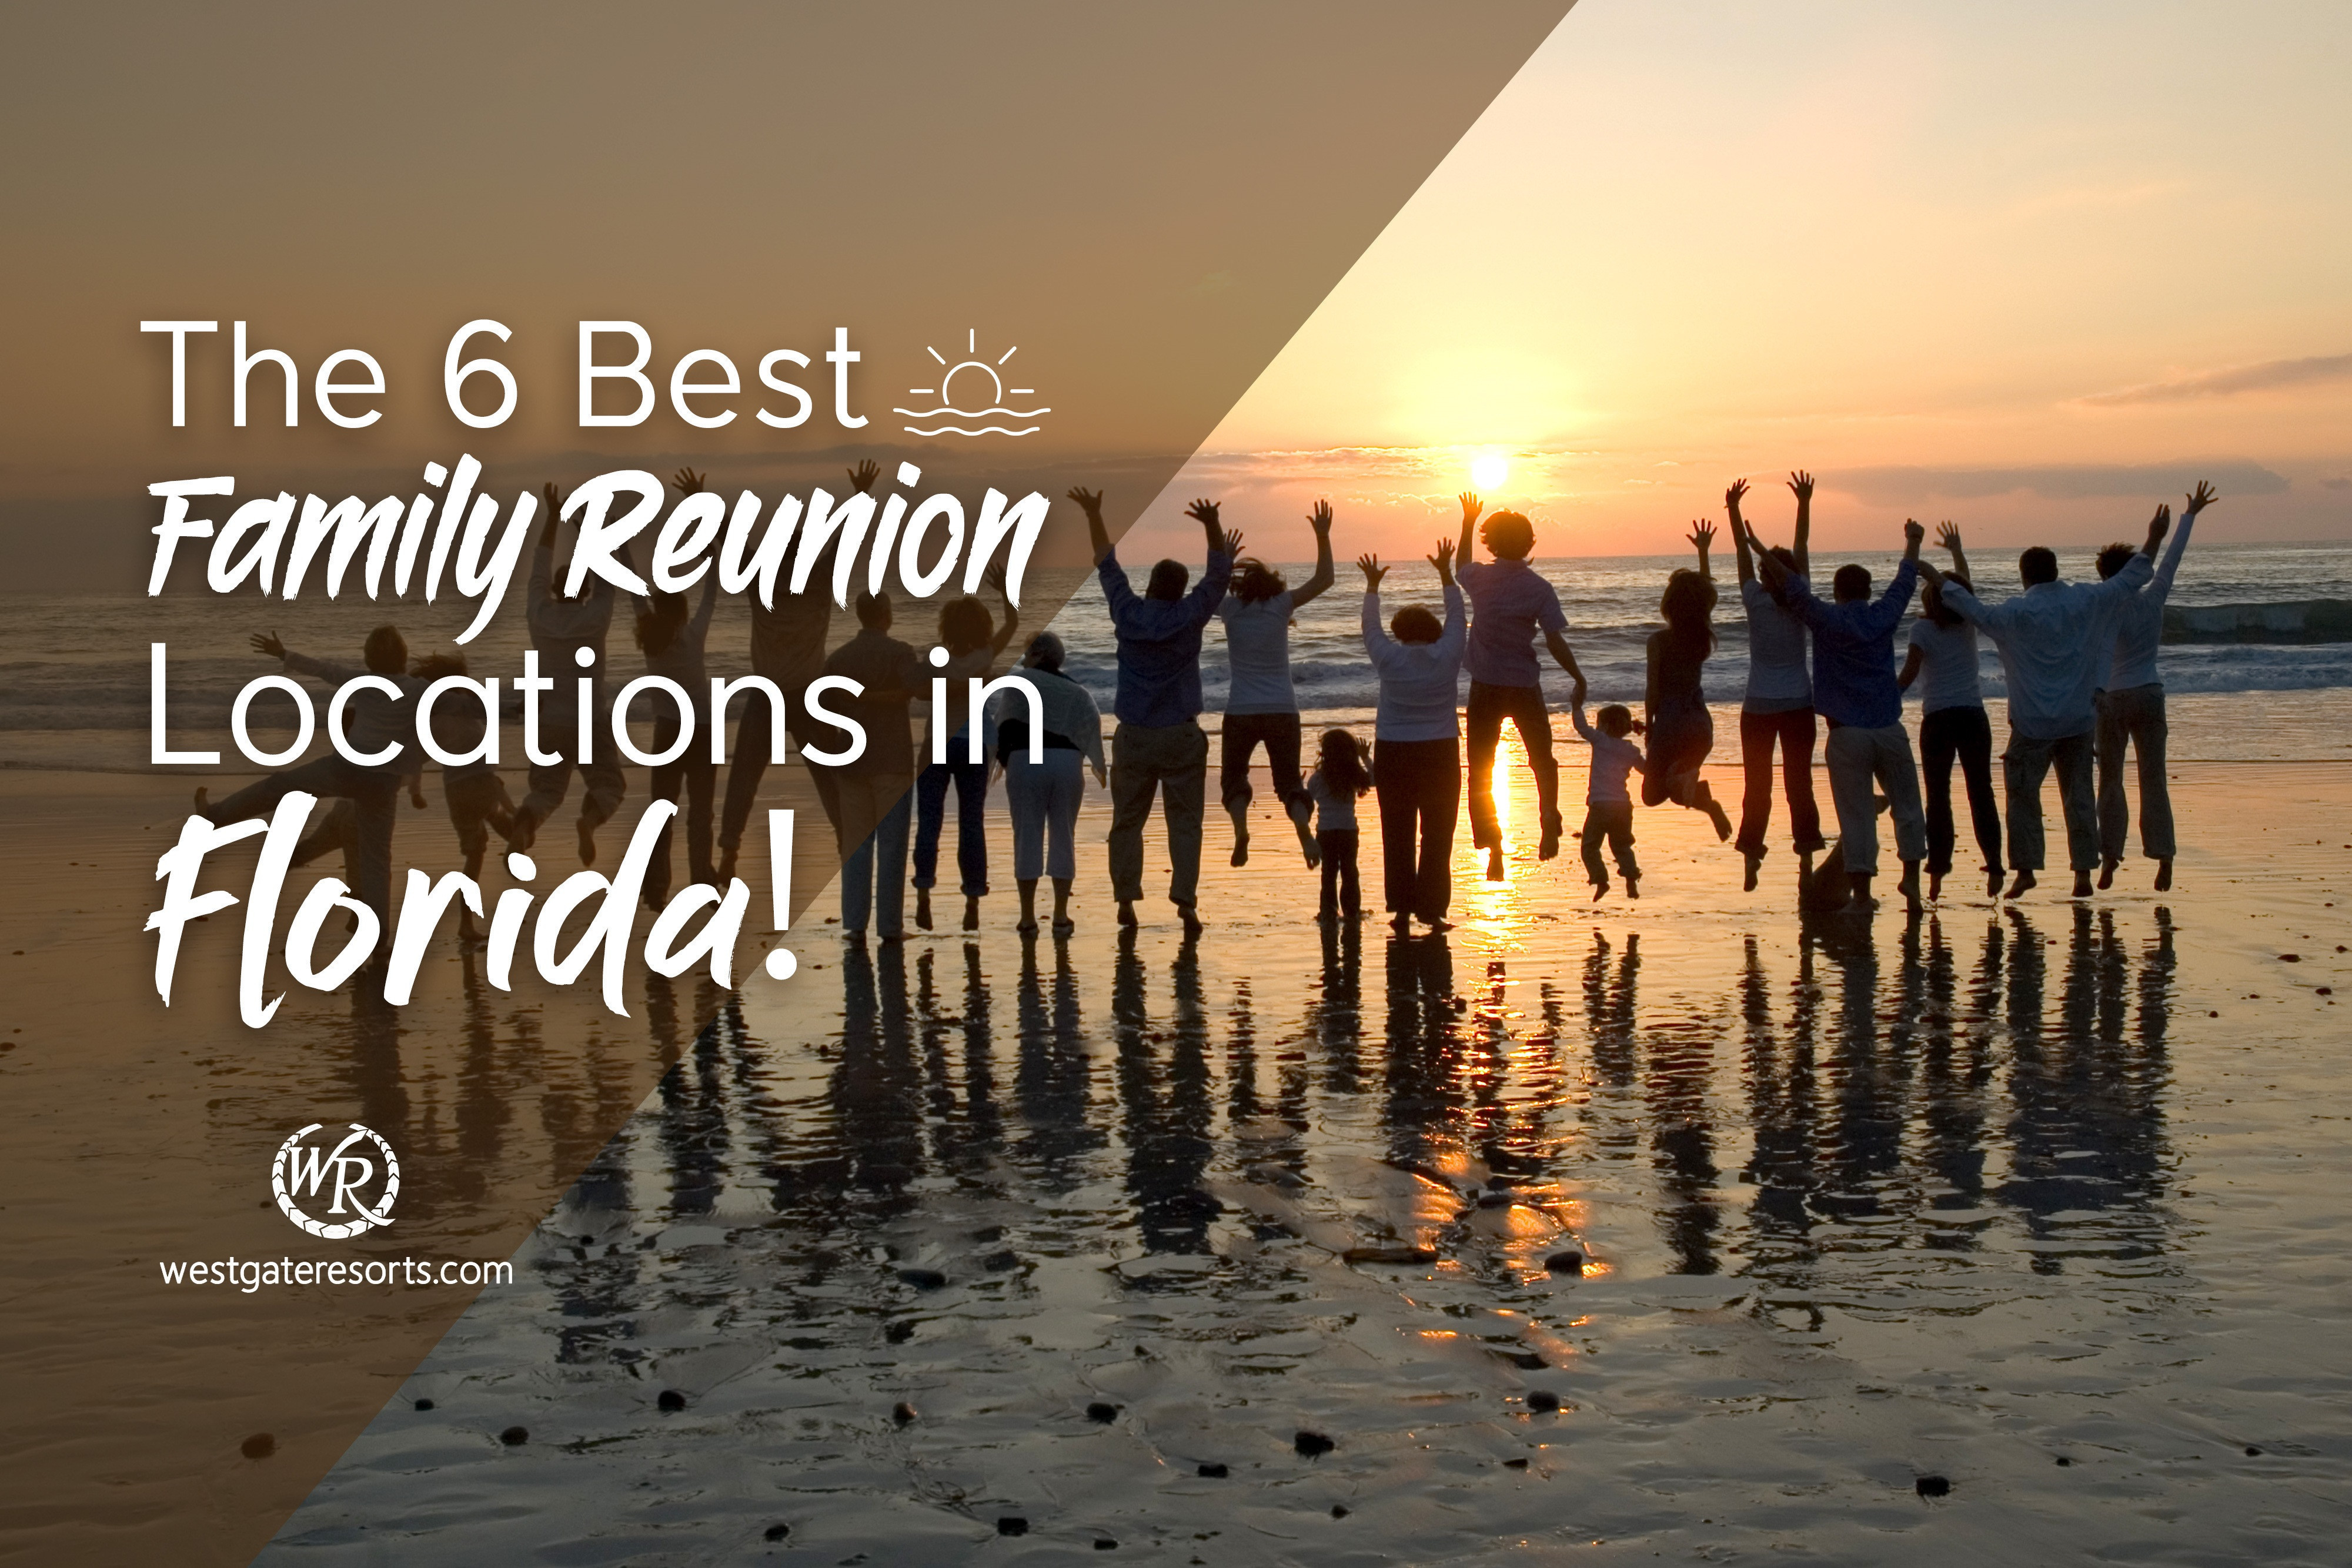 The 6 Best Family Reunion Locations in Florida!